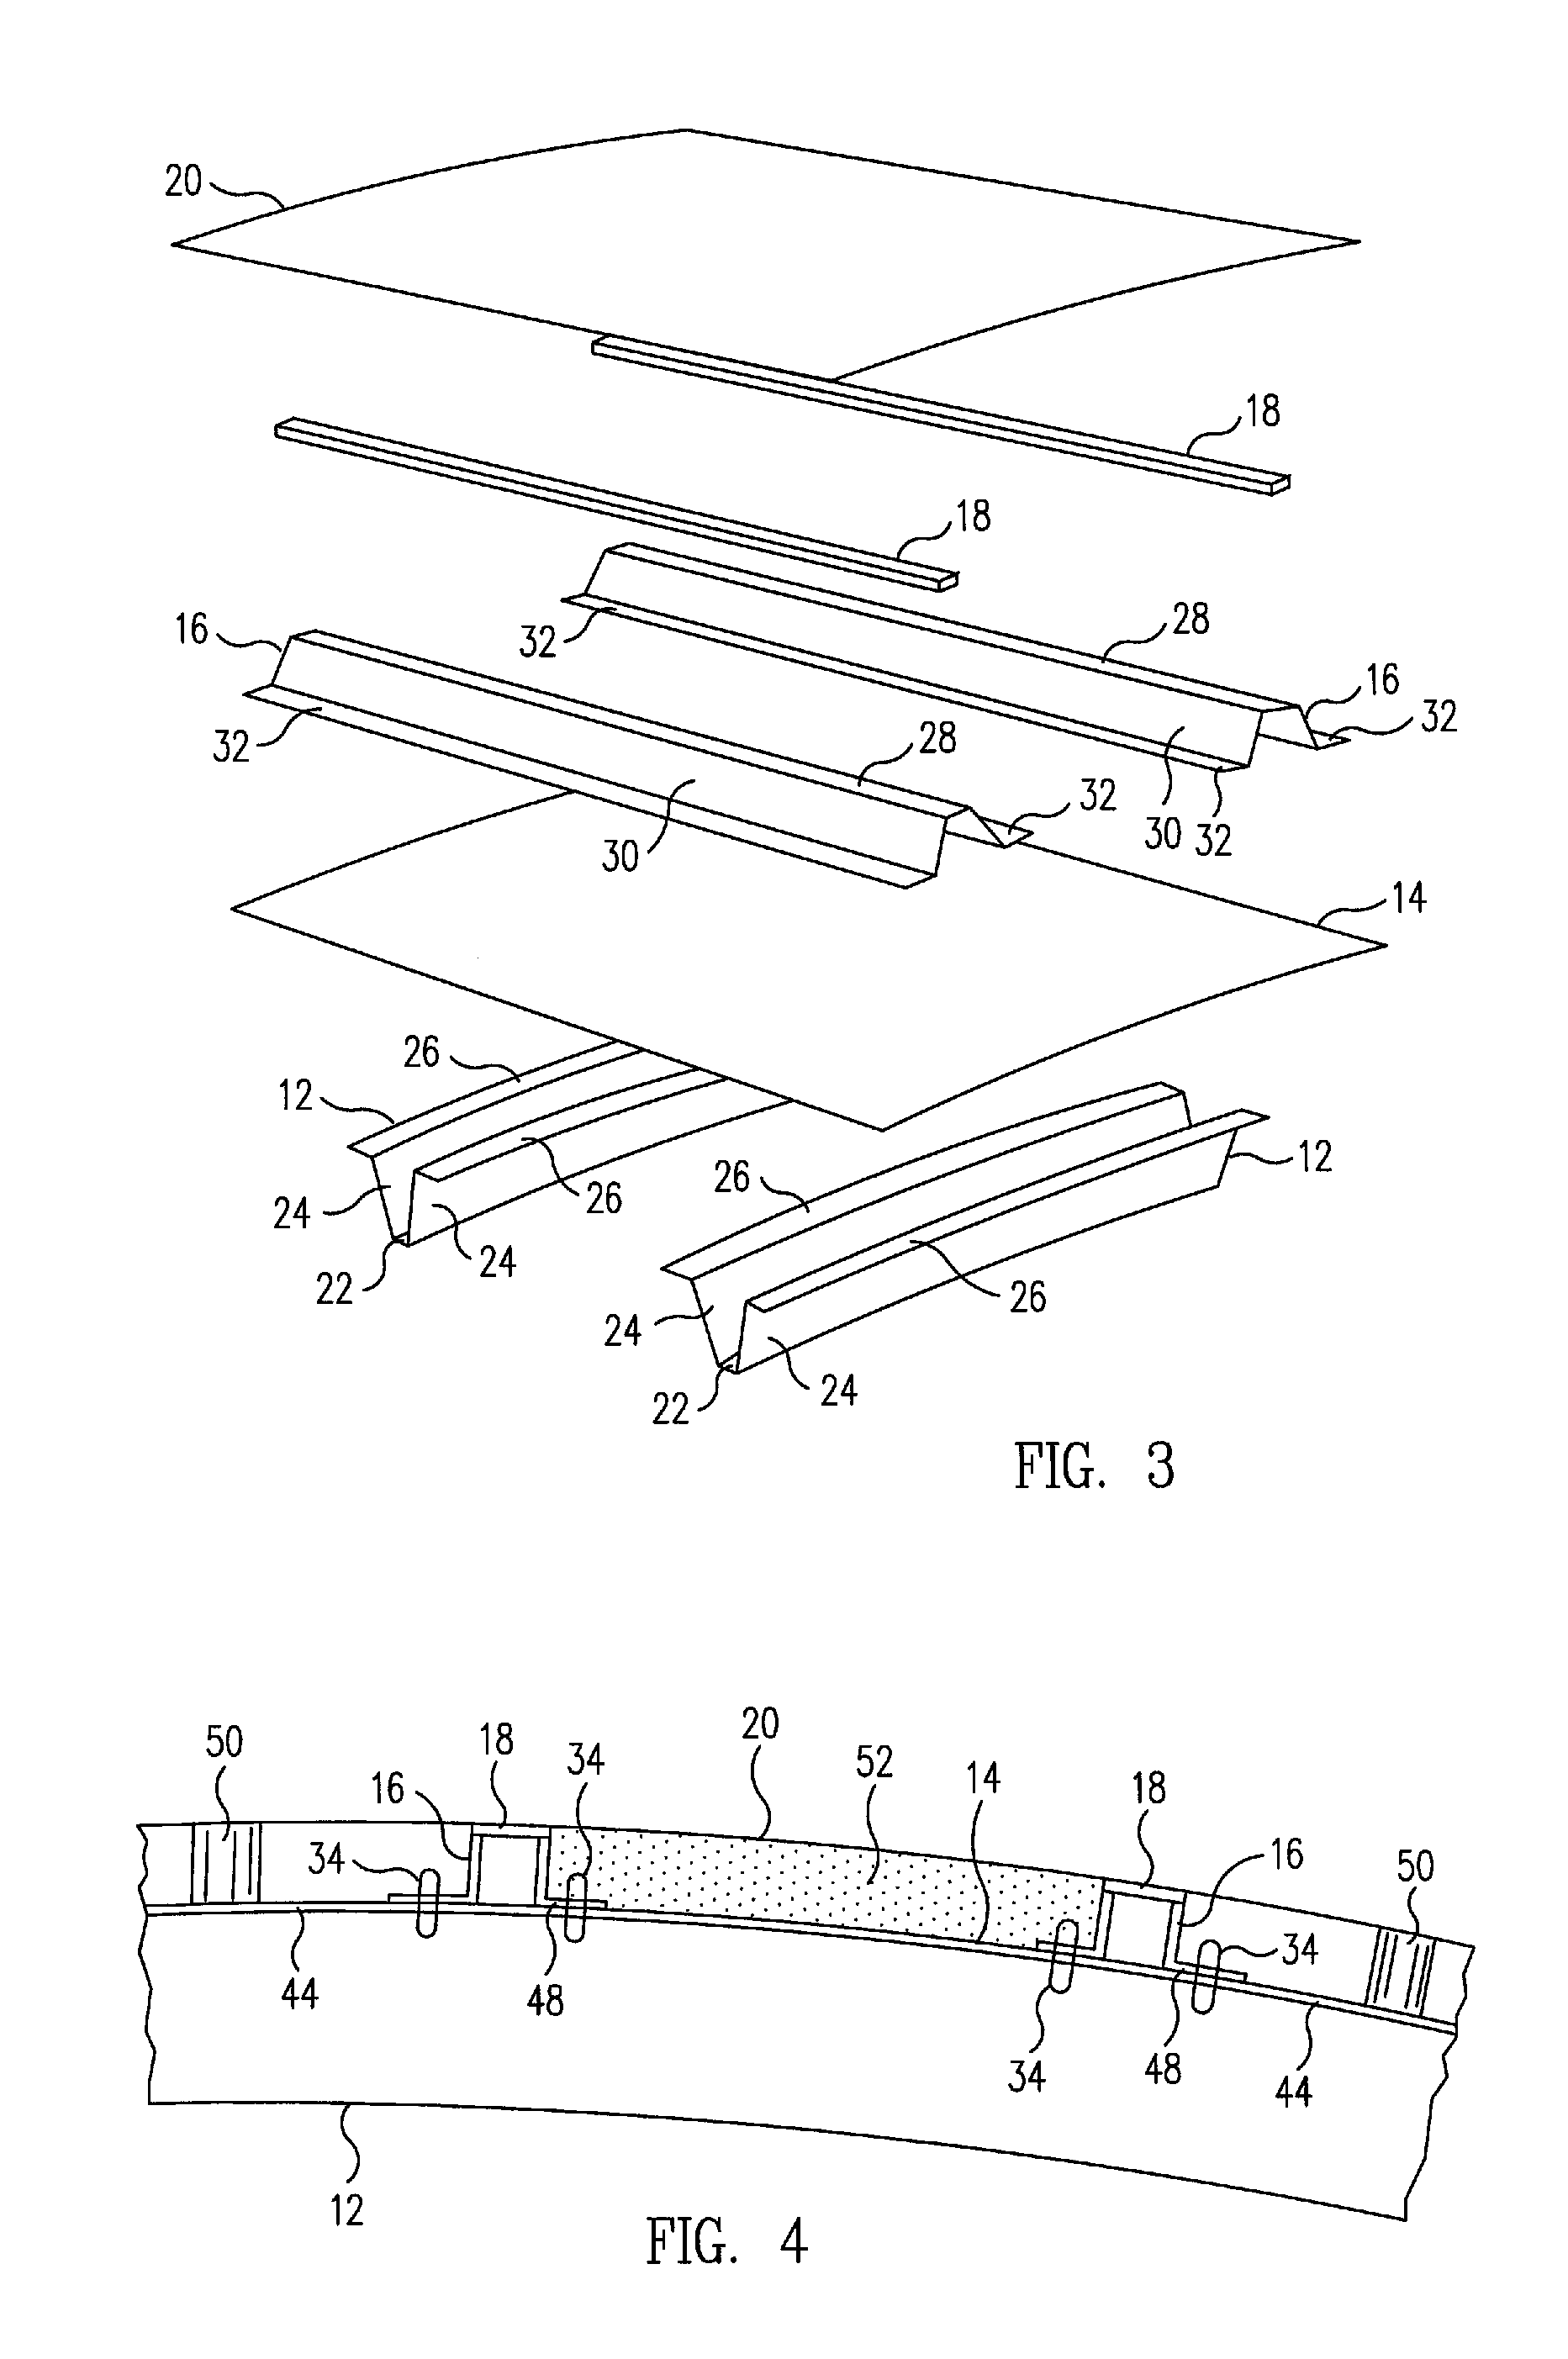 Composite aircraft structures with hat stiffeners